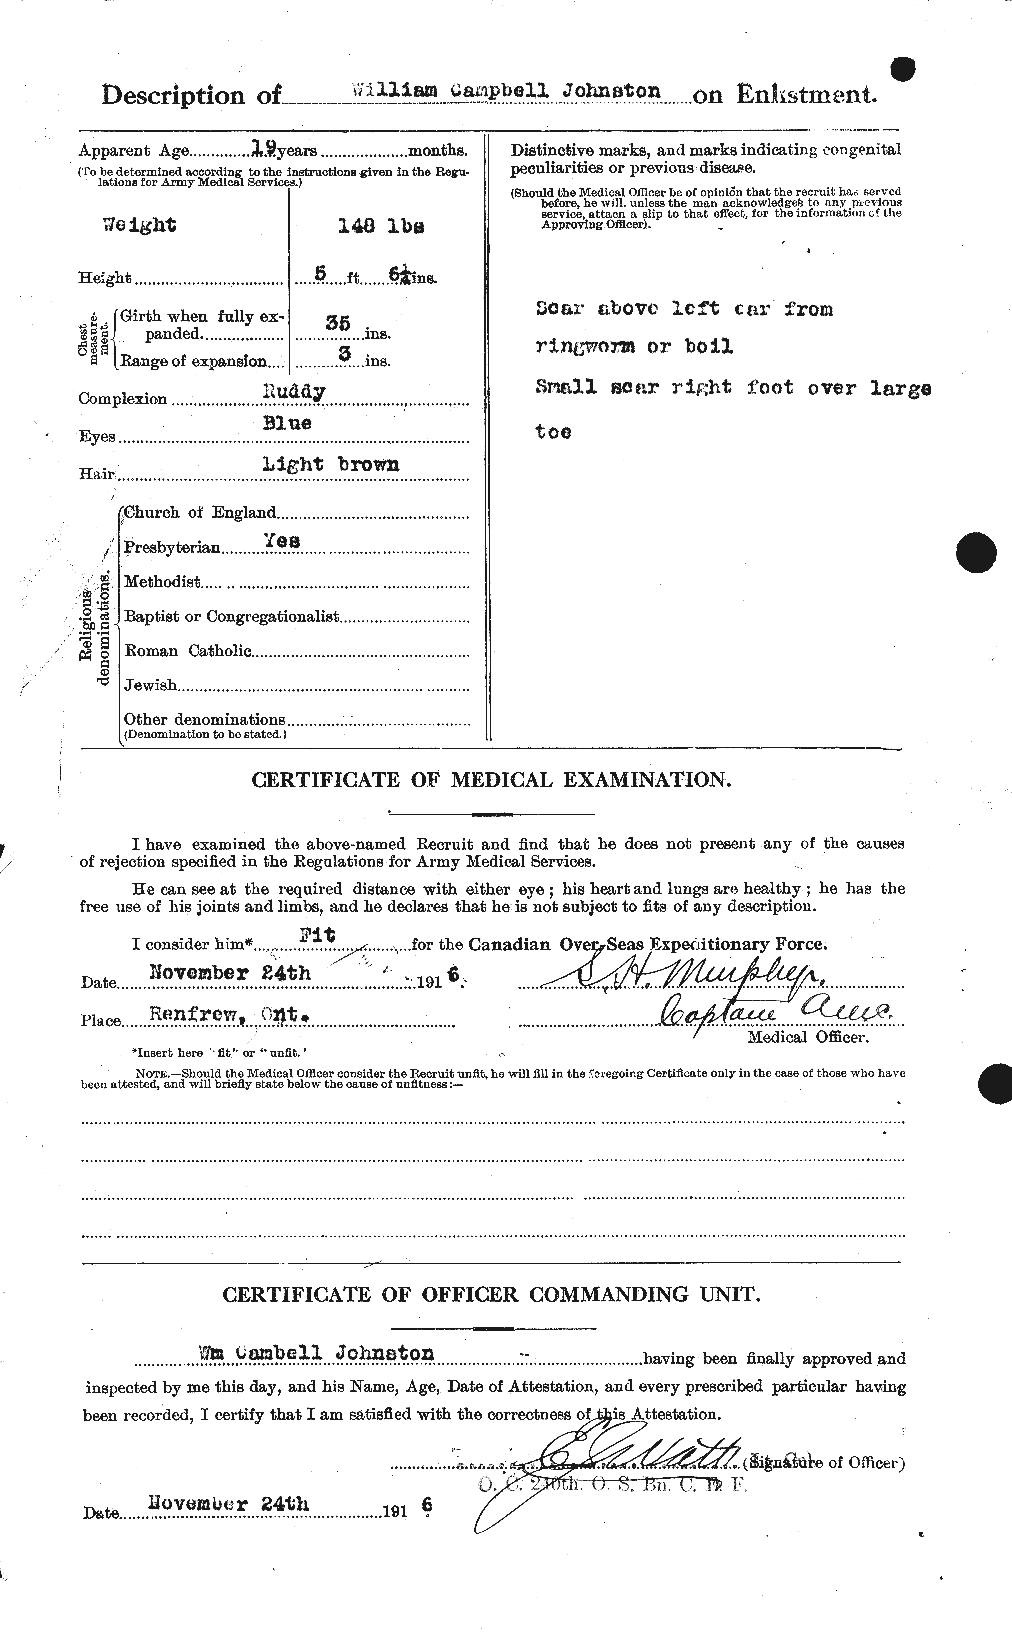 Personnel Records of the First World War - CEF 427307b